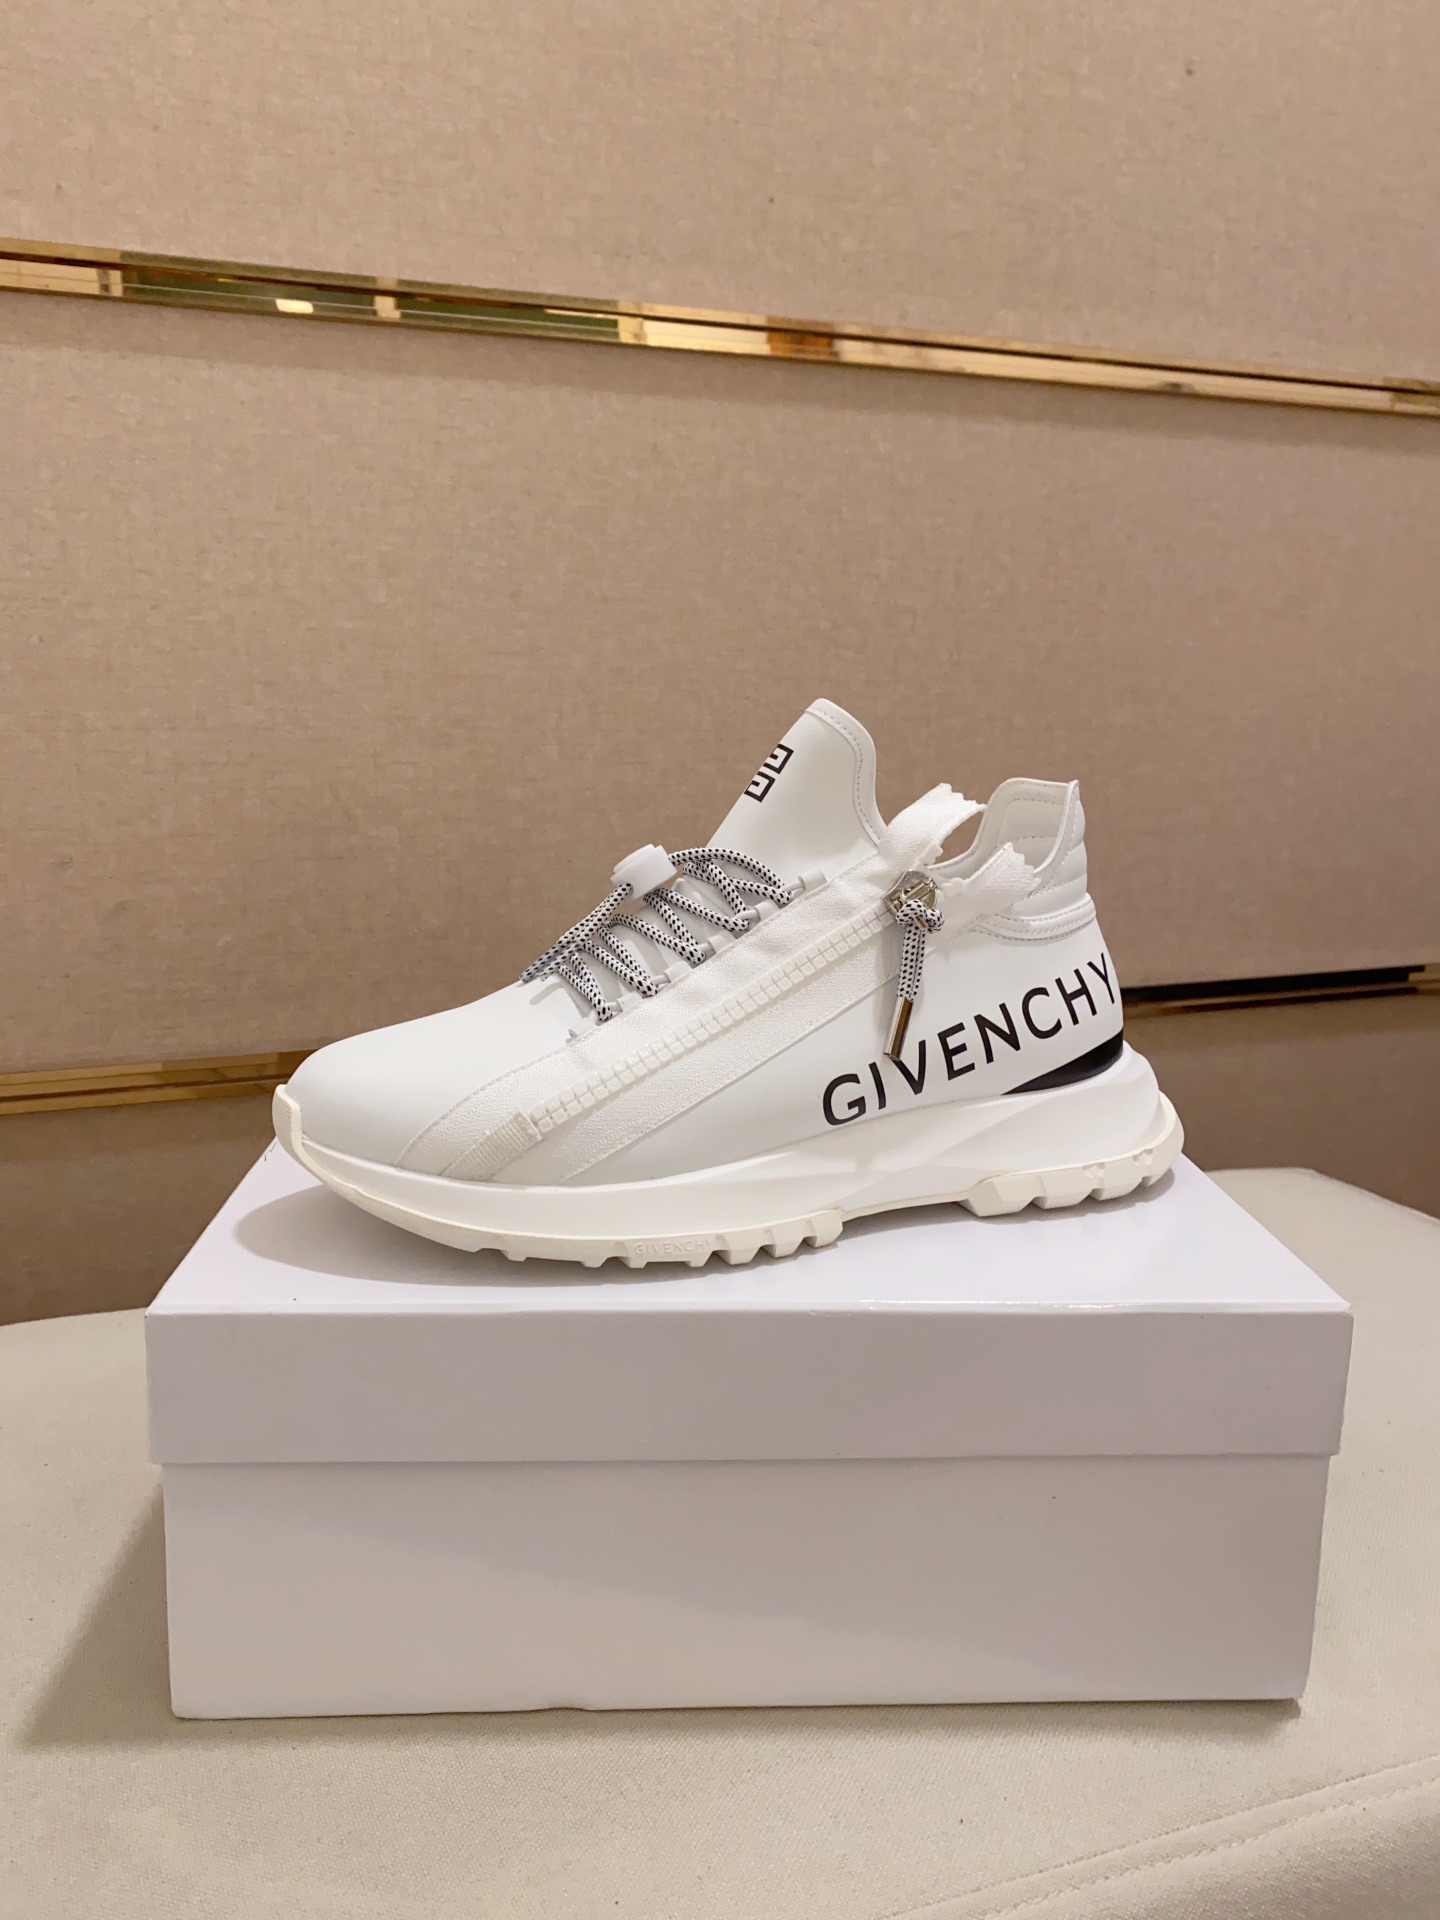 Givenchy’s new men’s sneakers💯